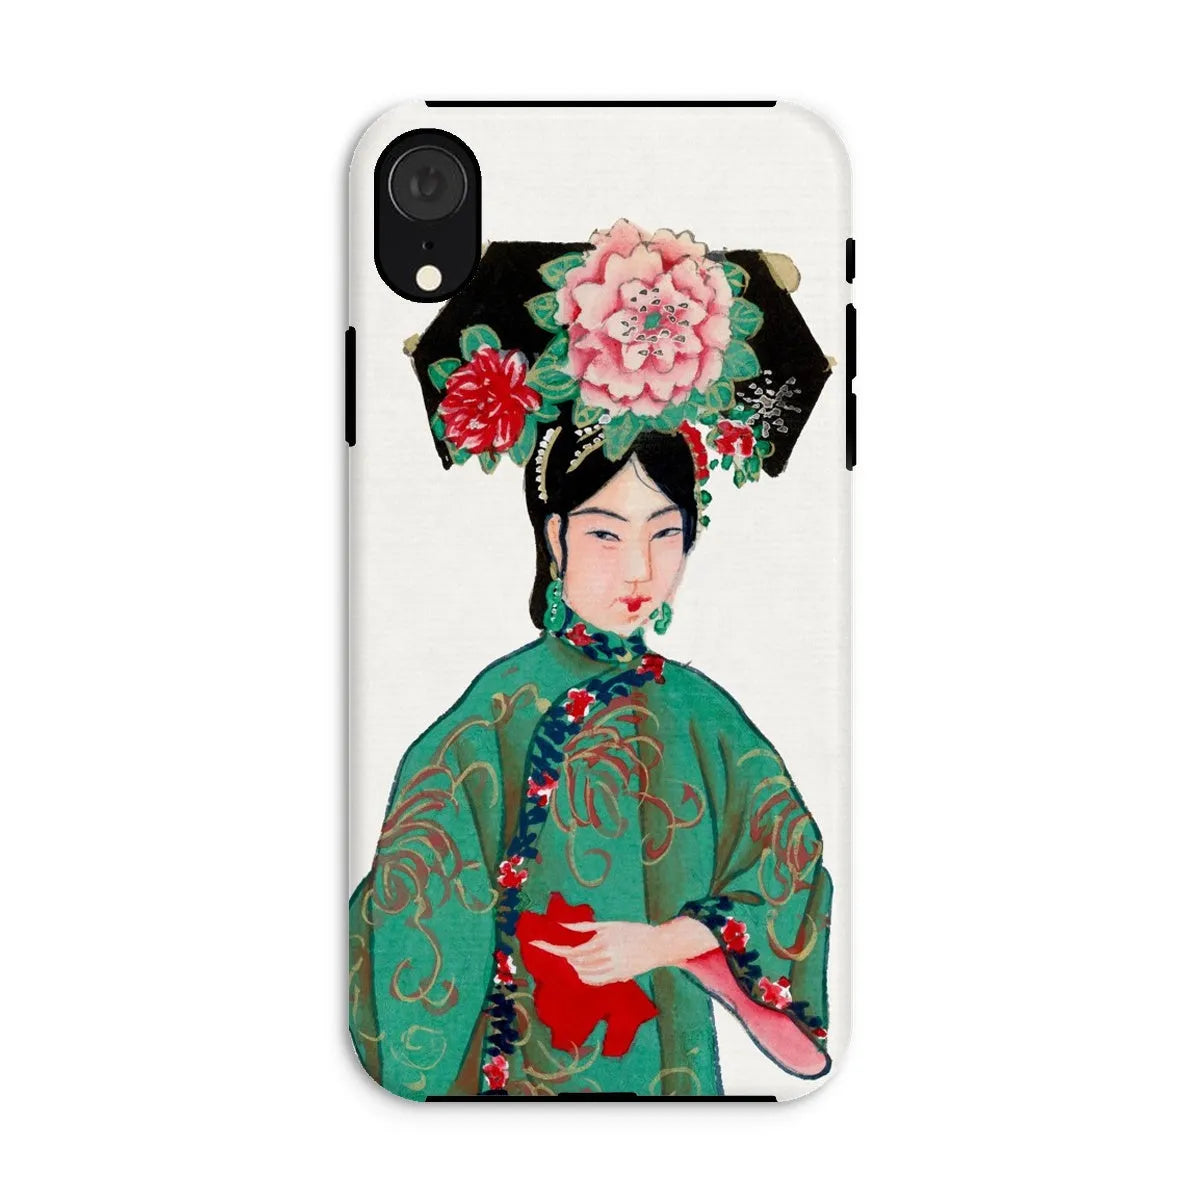 Chinese Noblewoman In Manchu Couture Art Phone Case - Iphone Xr / Matte - Mobile Phone Cases - Aesthetic Art